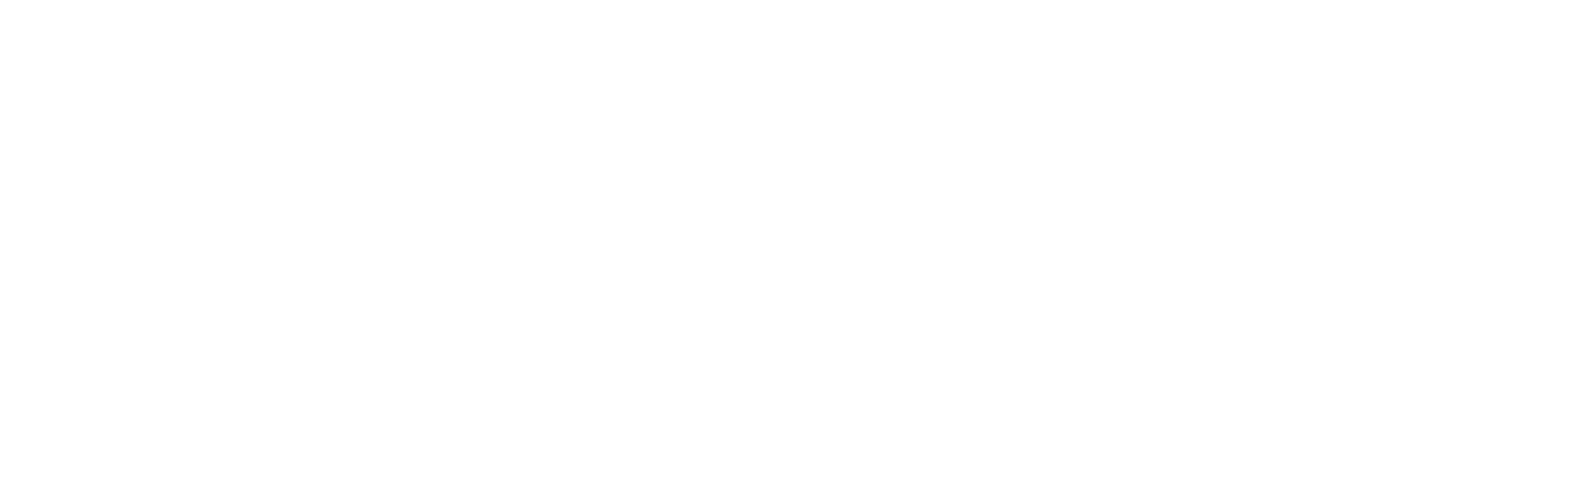 President Chain Store (PSCS) logo for dark backgrounds (transparent PNG)